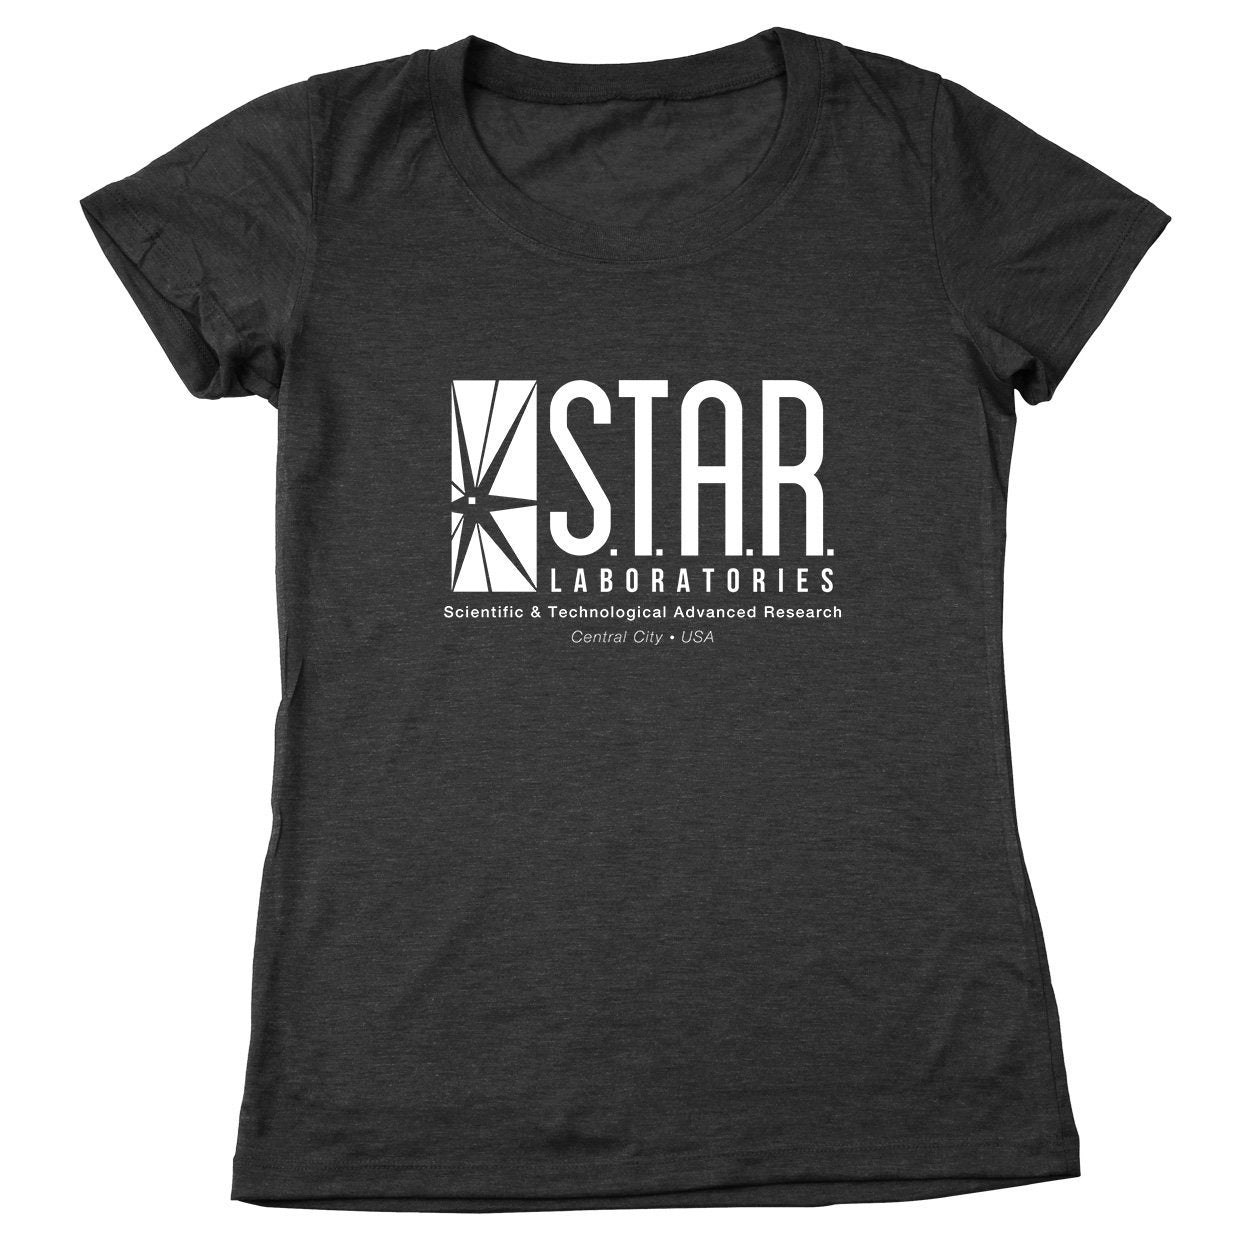 Star Labs S.T.A.R. Laboratories Women's Relaxed Fit Tri-Blend T-Shirt